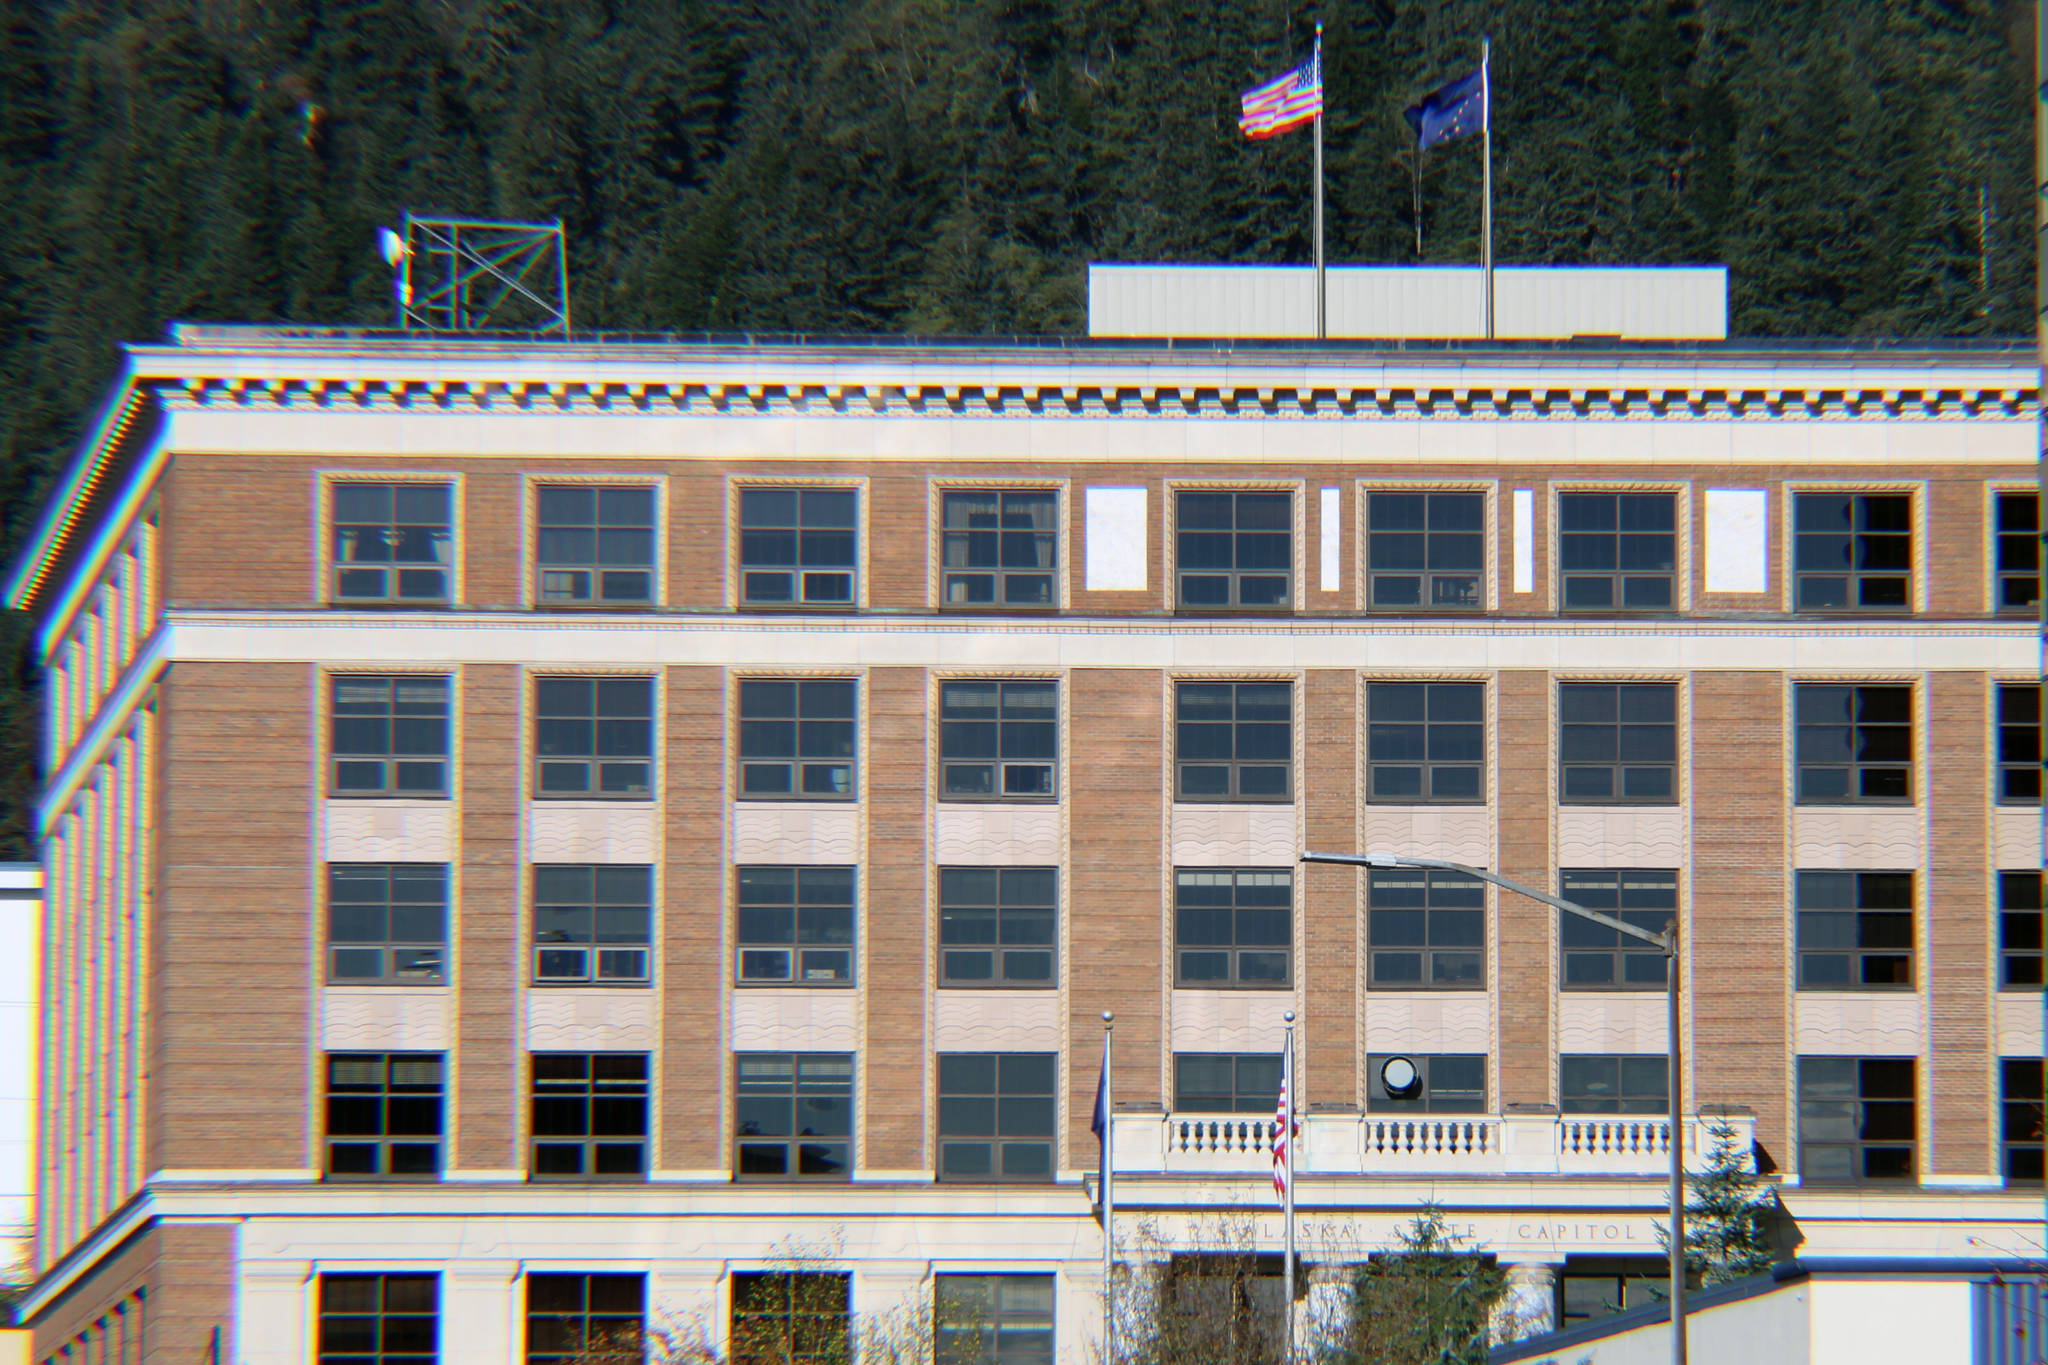 Ben Hohenstatt / Juneau Empire File
The U.S. Flag and Alaska state flag fly on the roof of the Alaska State Capitol on Oct. 17. With just over a month before legislative session is set to begin, some lawmakers are waiting to lock down digs. One factor: uncertainty about how — and for how long — lawmakers plan to meet.